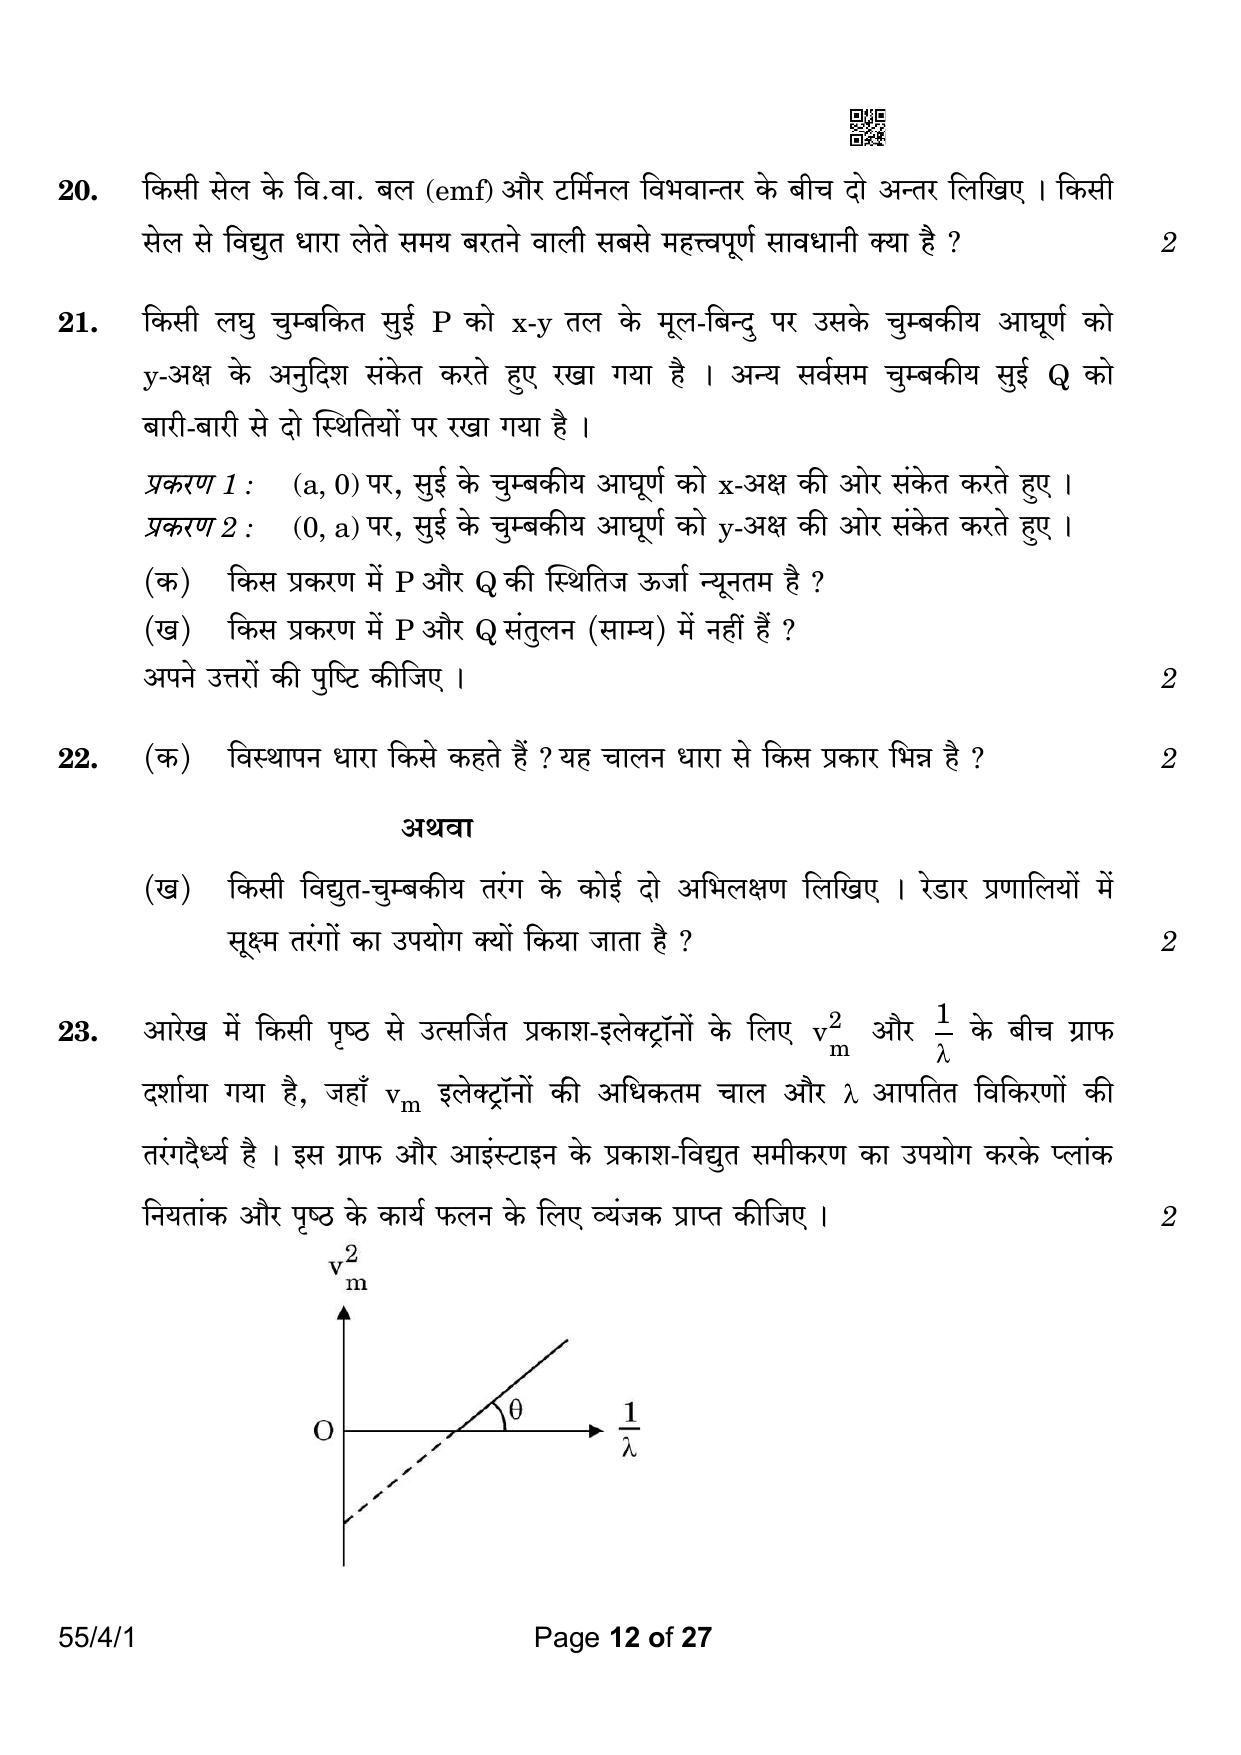 CBSE Class 12 55-4-1 Physics 2023 Question Paper - Page 12